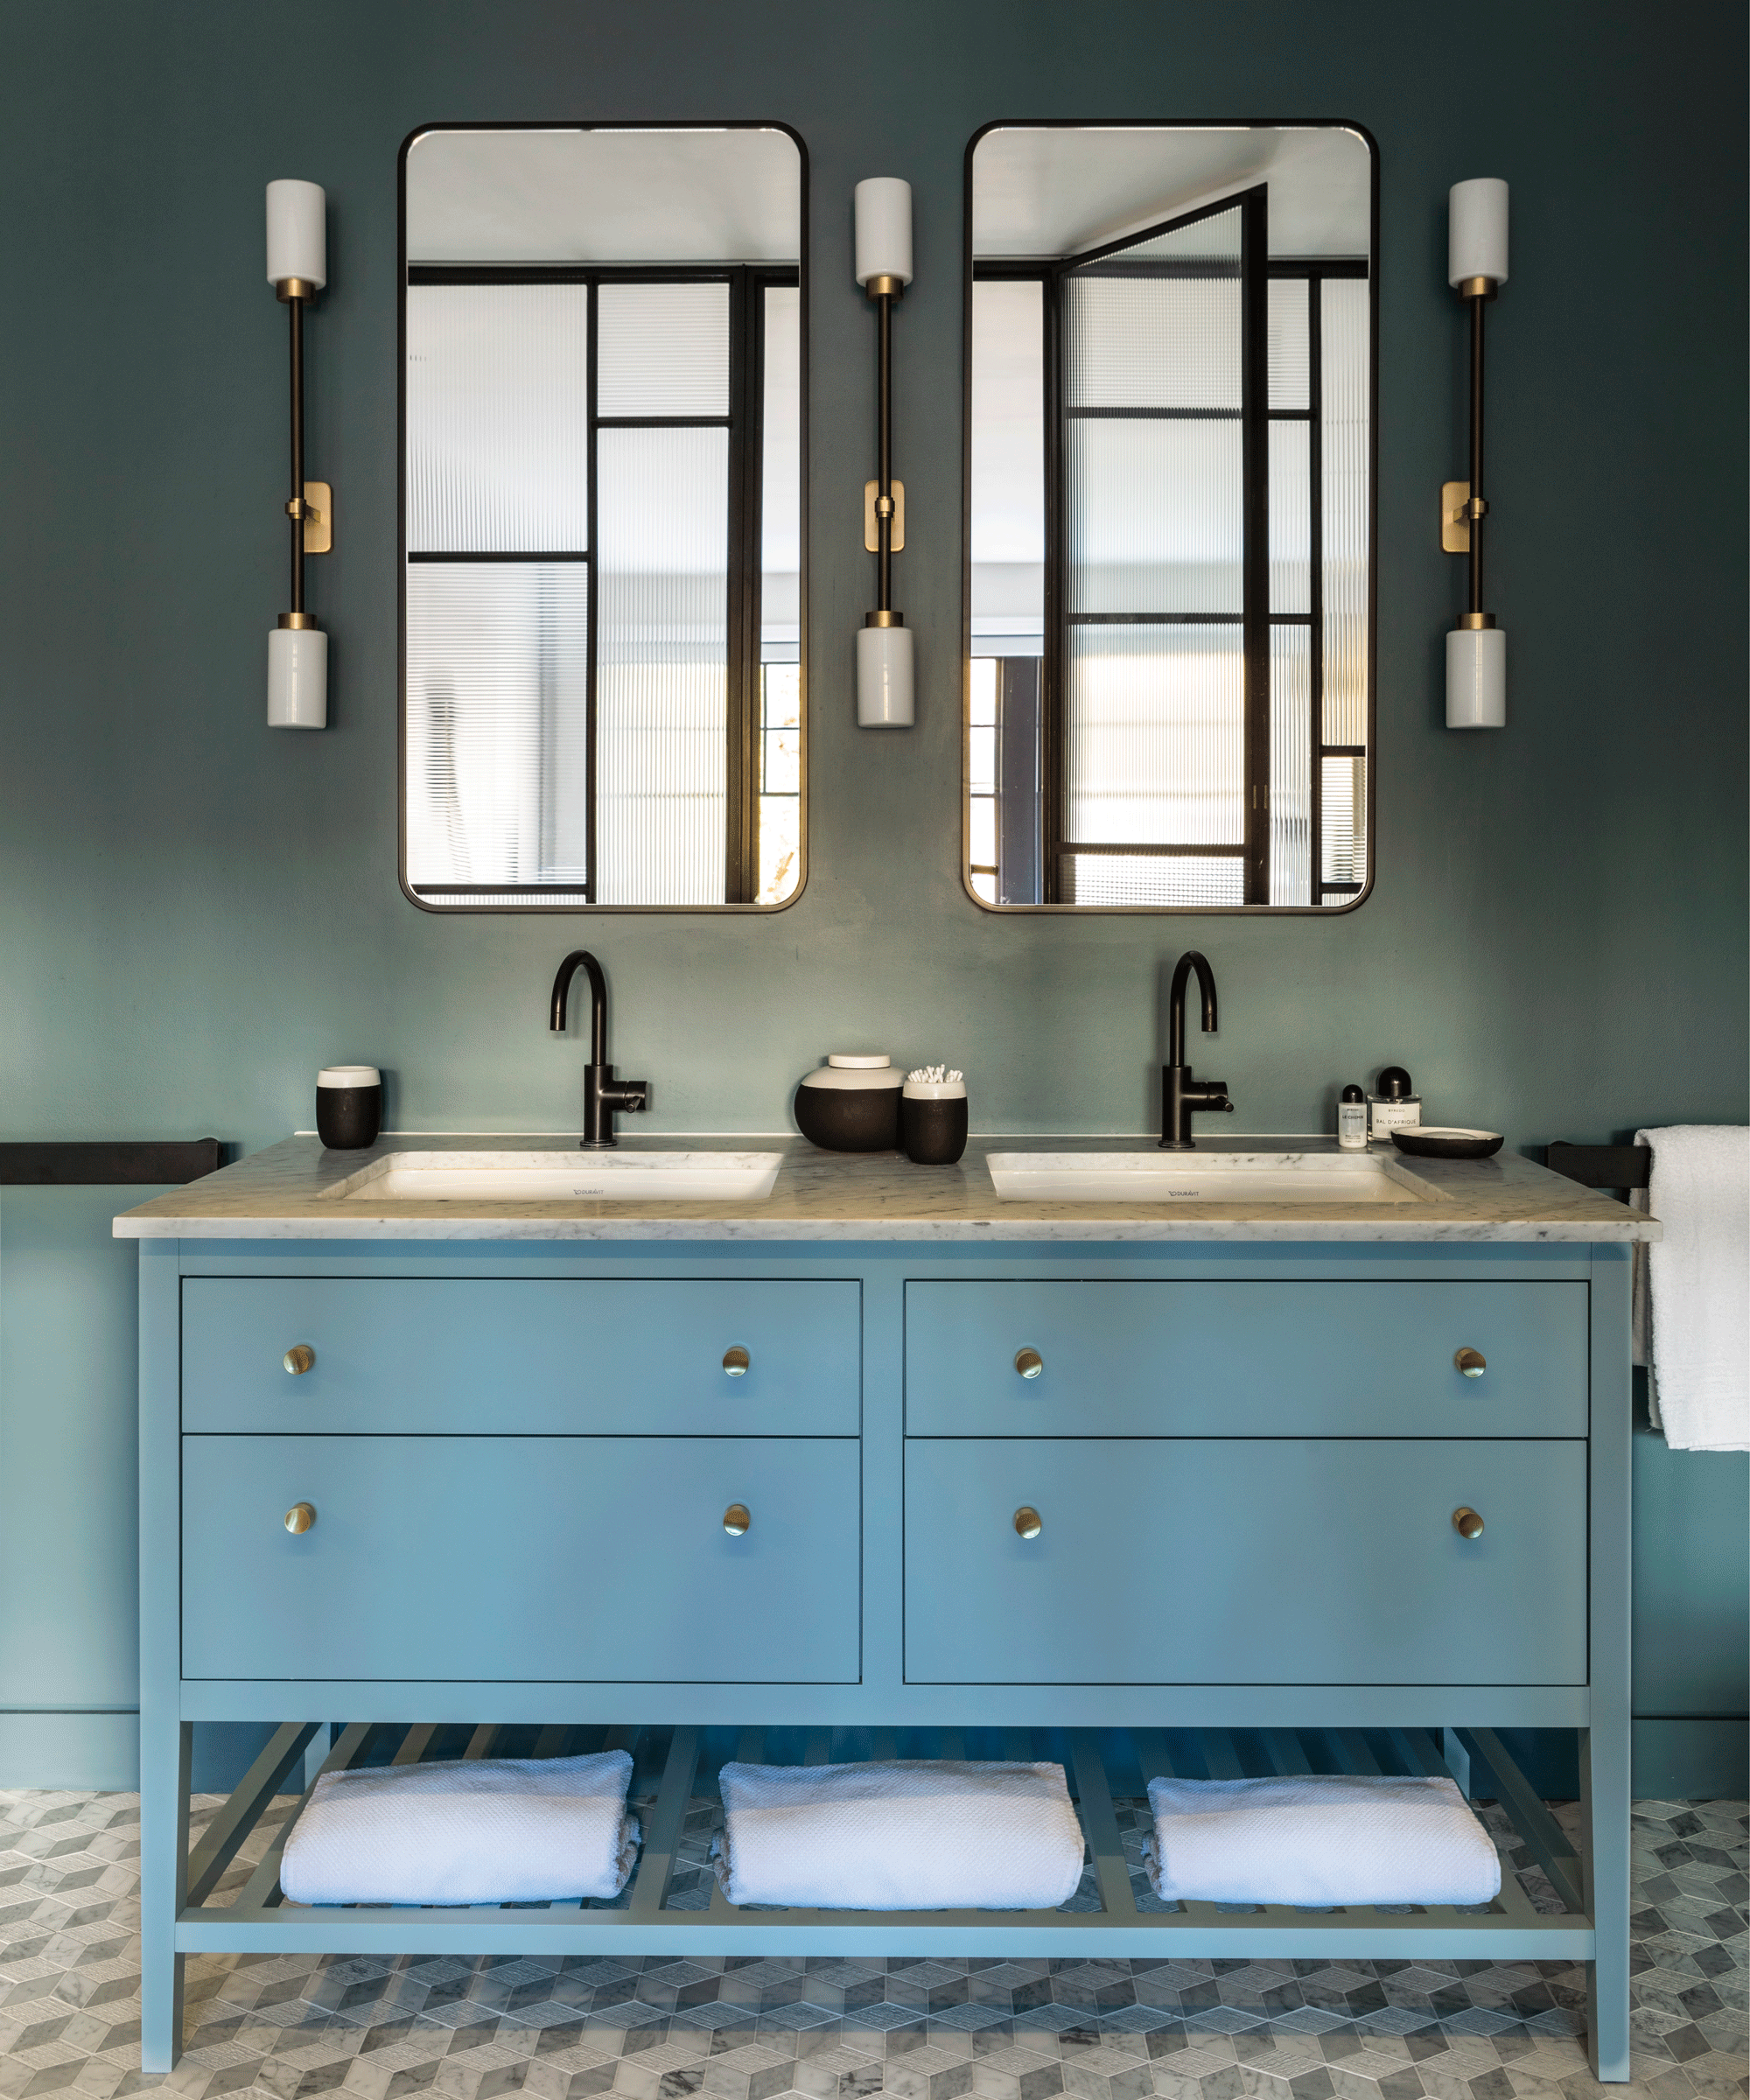 An example of bathroom vanity ideas showing a blue double bathroom vanity with towel storage below and matching mirrors and wall lights above